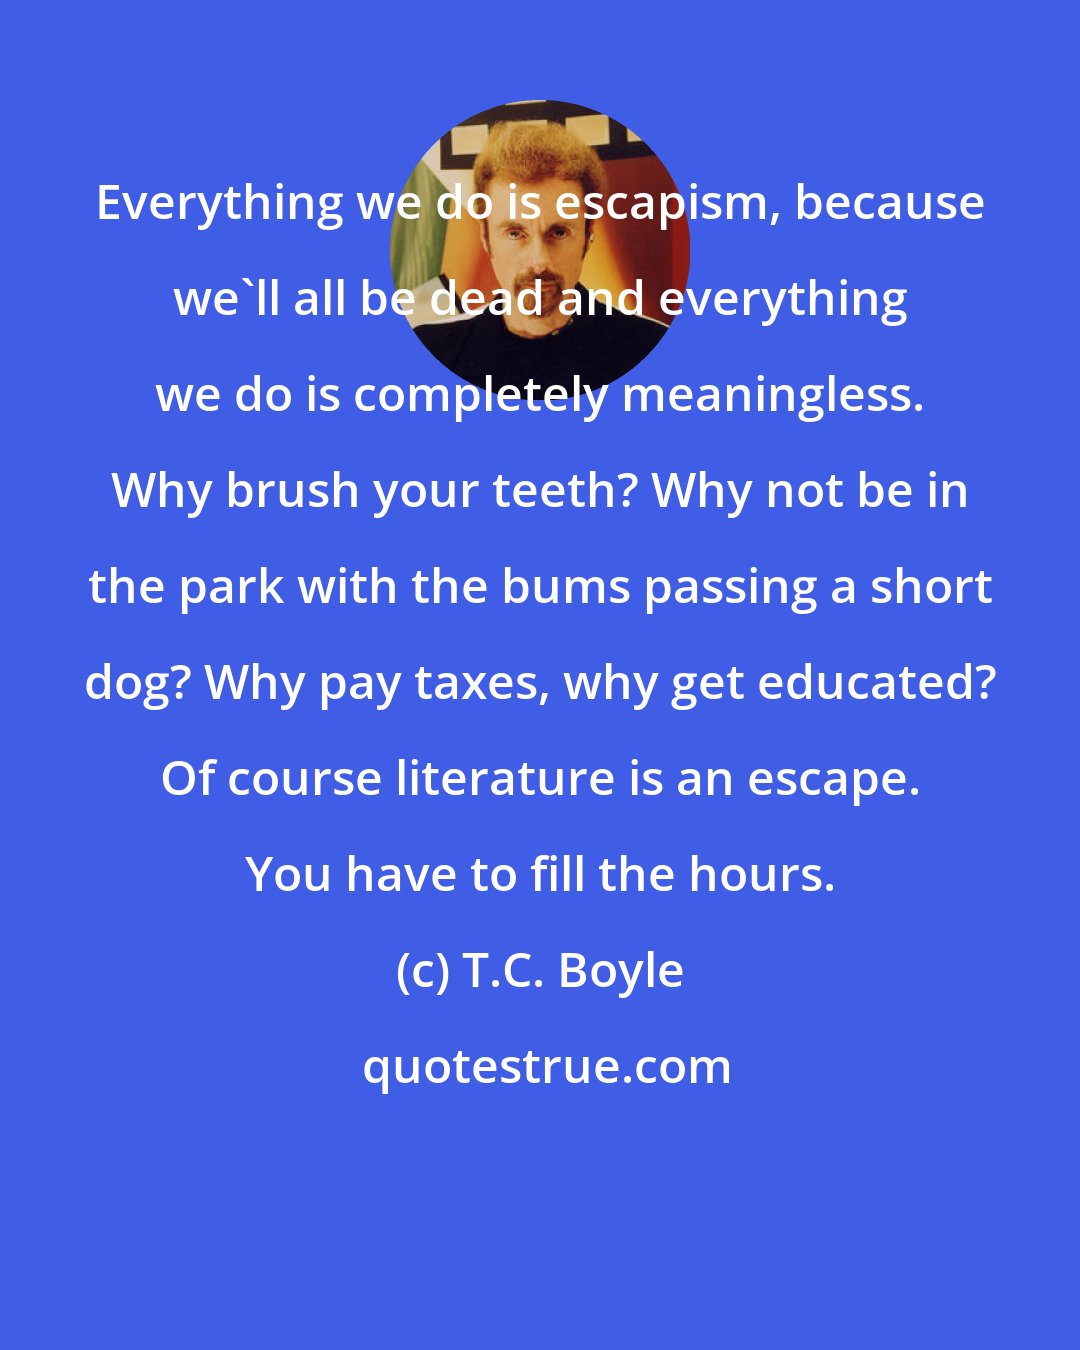 T.C. Boyle: Everything we do is escapism, because we'll all be dead and everything we do is completely meaningless. Why brush your teeth? Why not be in the park with the bums passing a short dog? Why pay taxes, why get educated? Of course literature is an escape. You have to fill the hours.